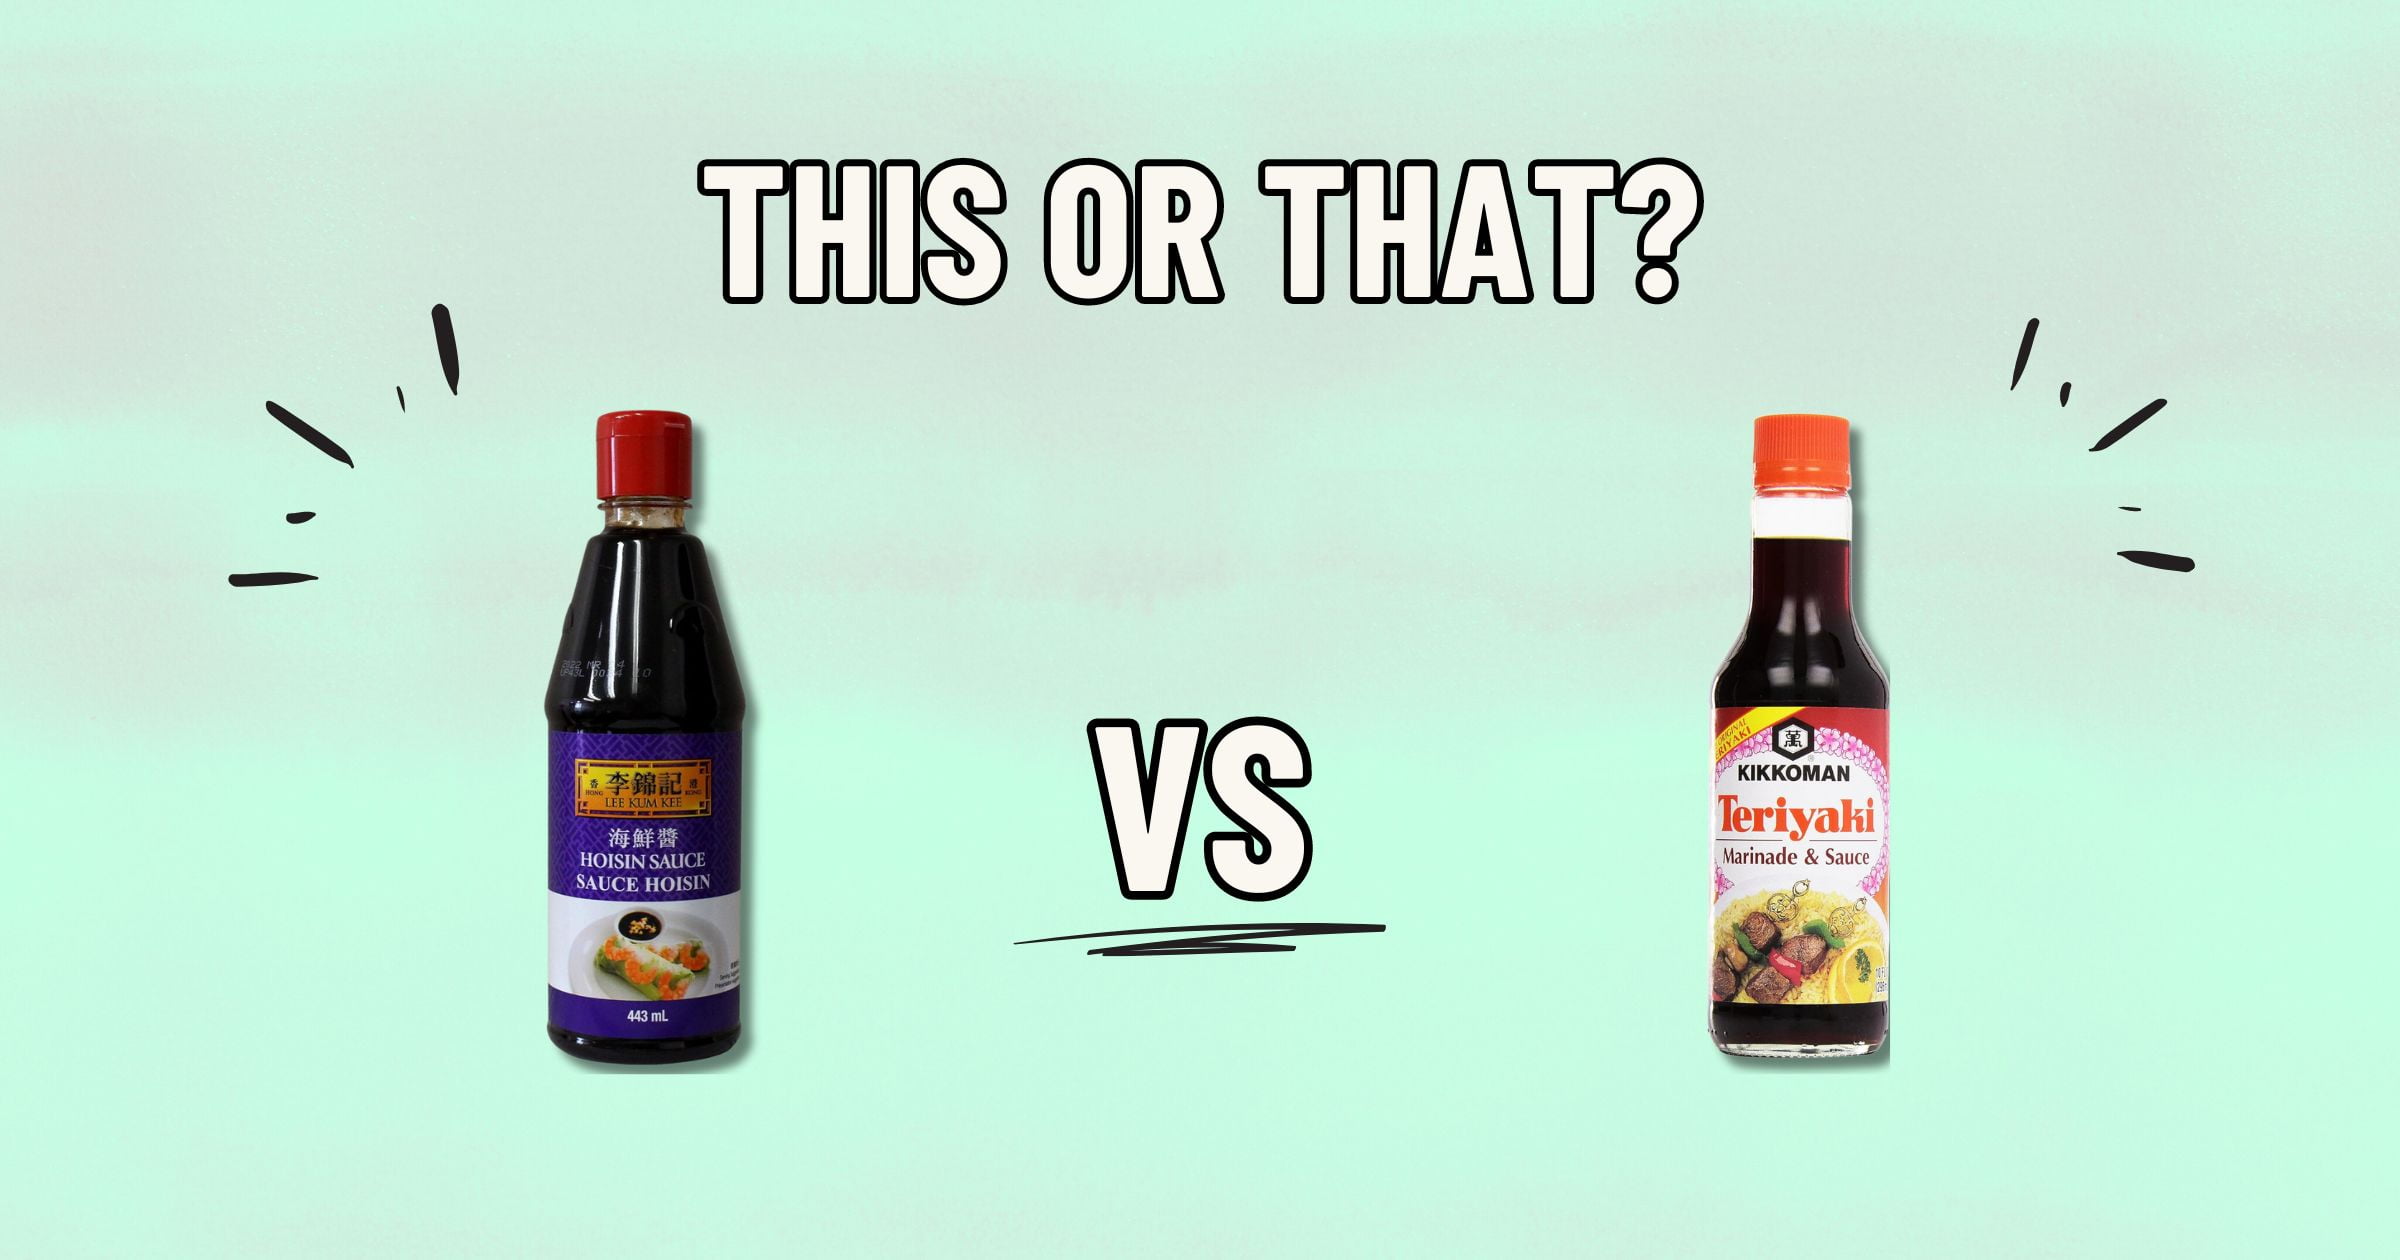 Two bottles are pictured against a light green background with "THIS OR THAT?" above them. On the left, a bottle of hoisin sauce; on the right, a bottle of teriyaki sauce. The word "VS" is centered between them, inviting you to compare which one might be the healthier option.